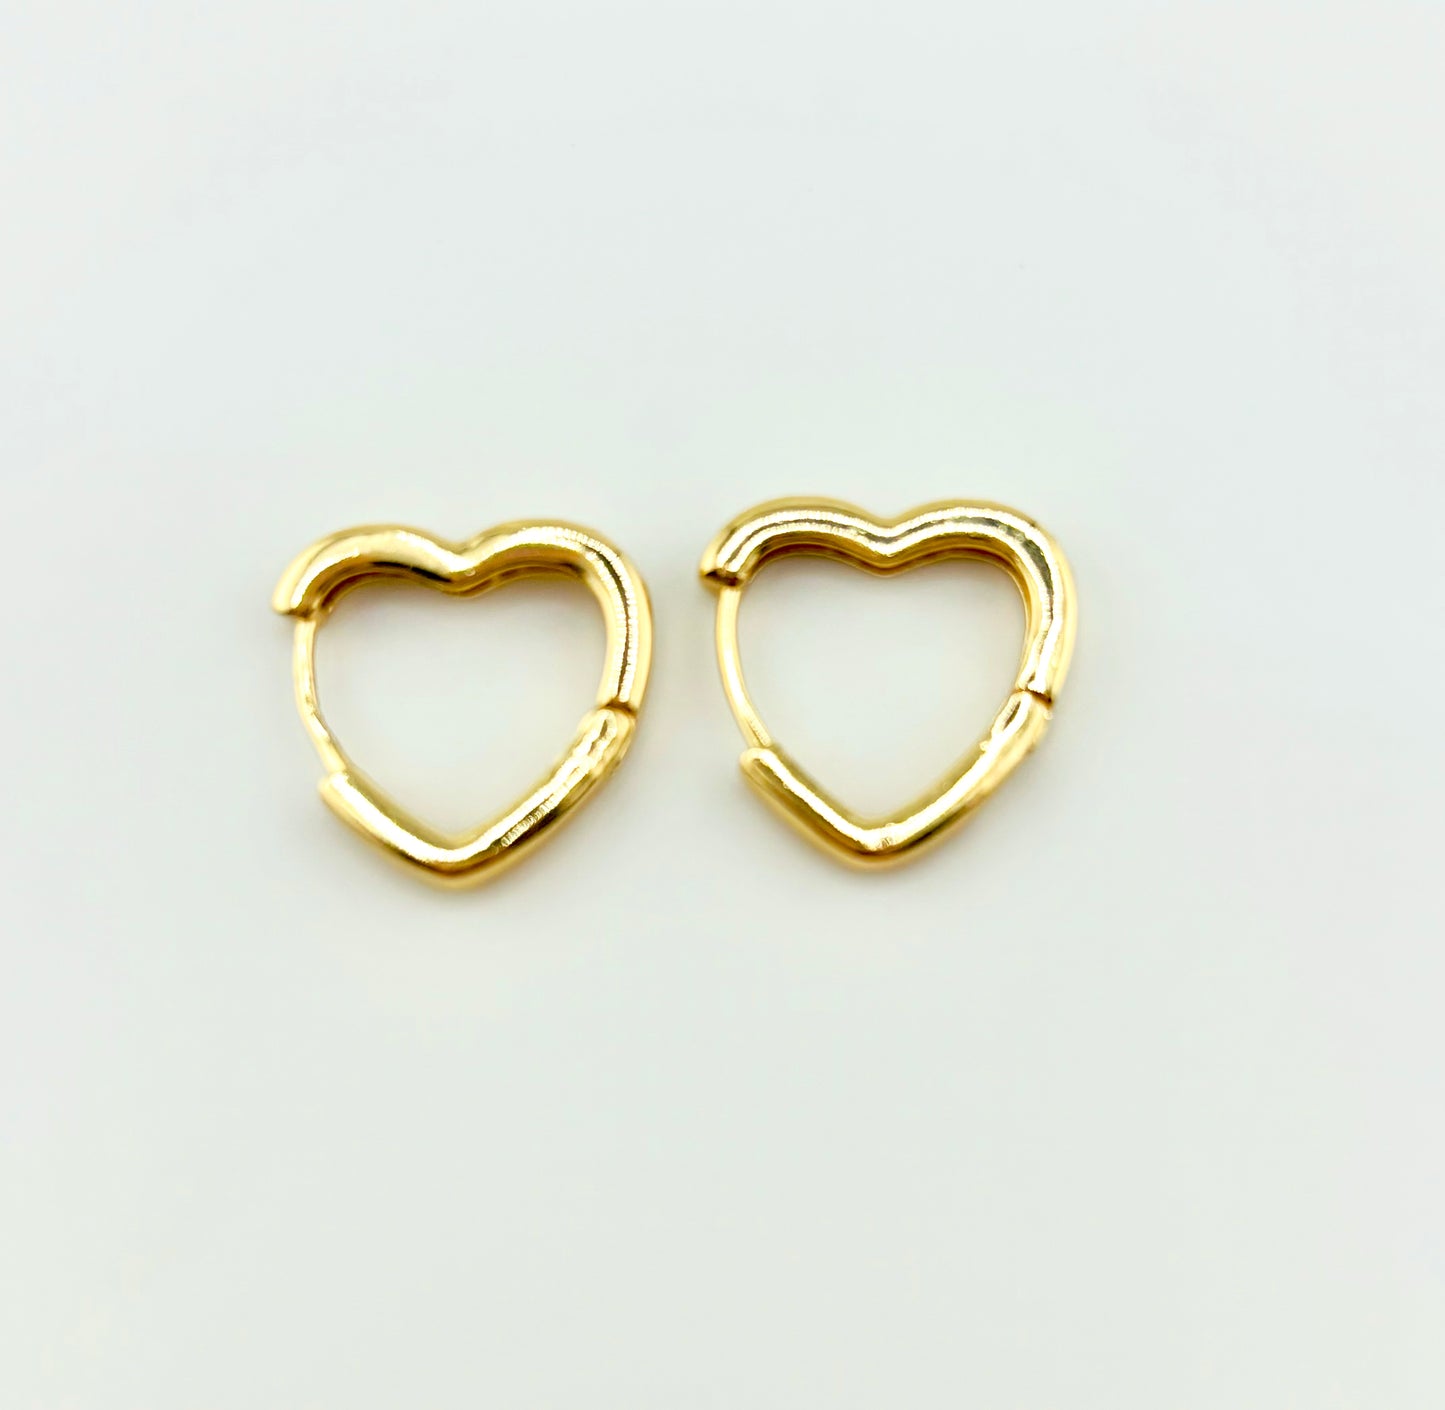 Eminating love peruvian earrings with 18k gold filled with cubic zircoinia